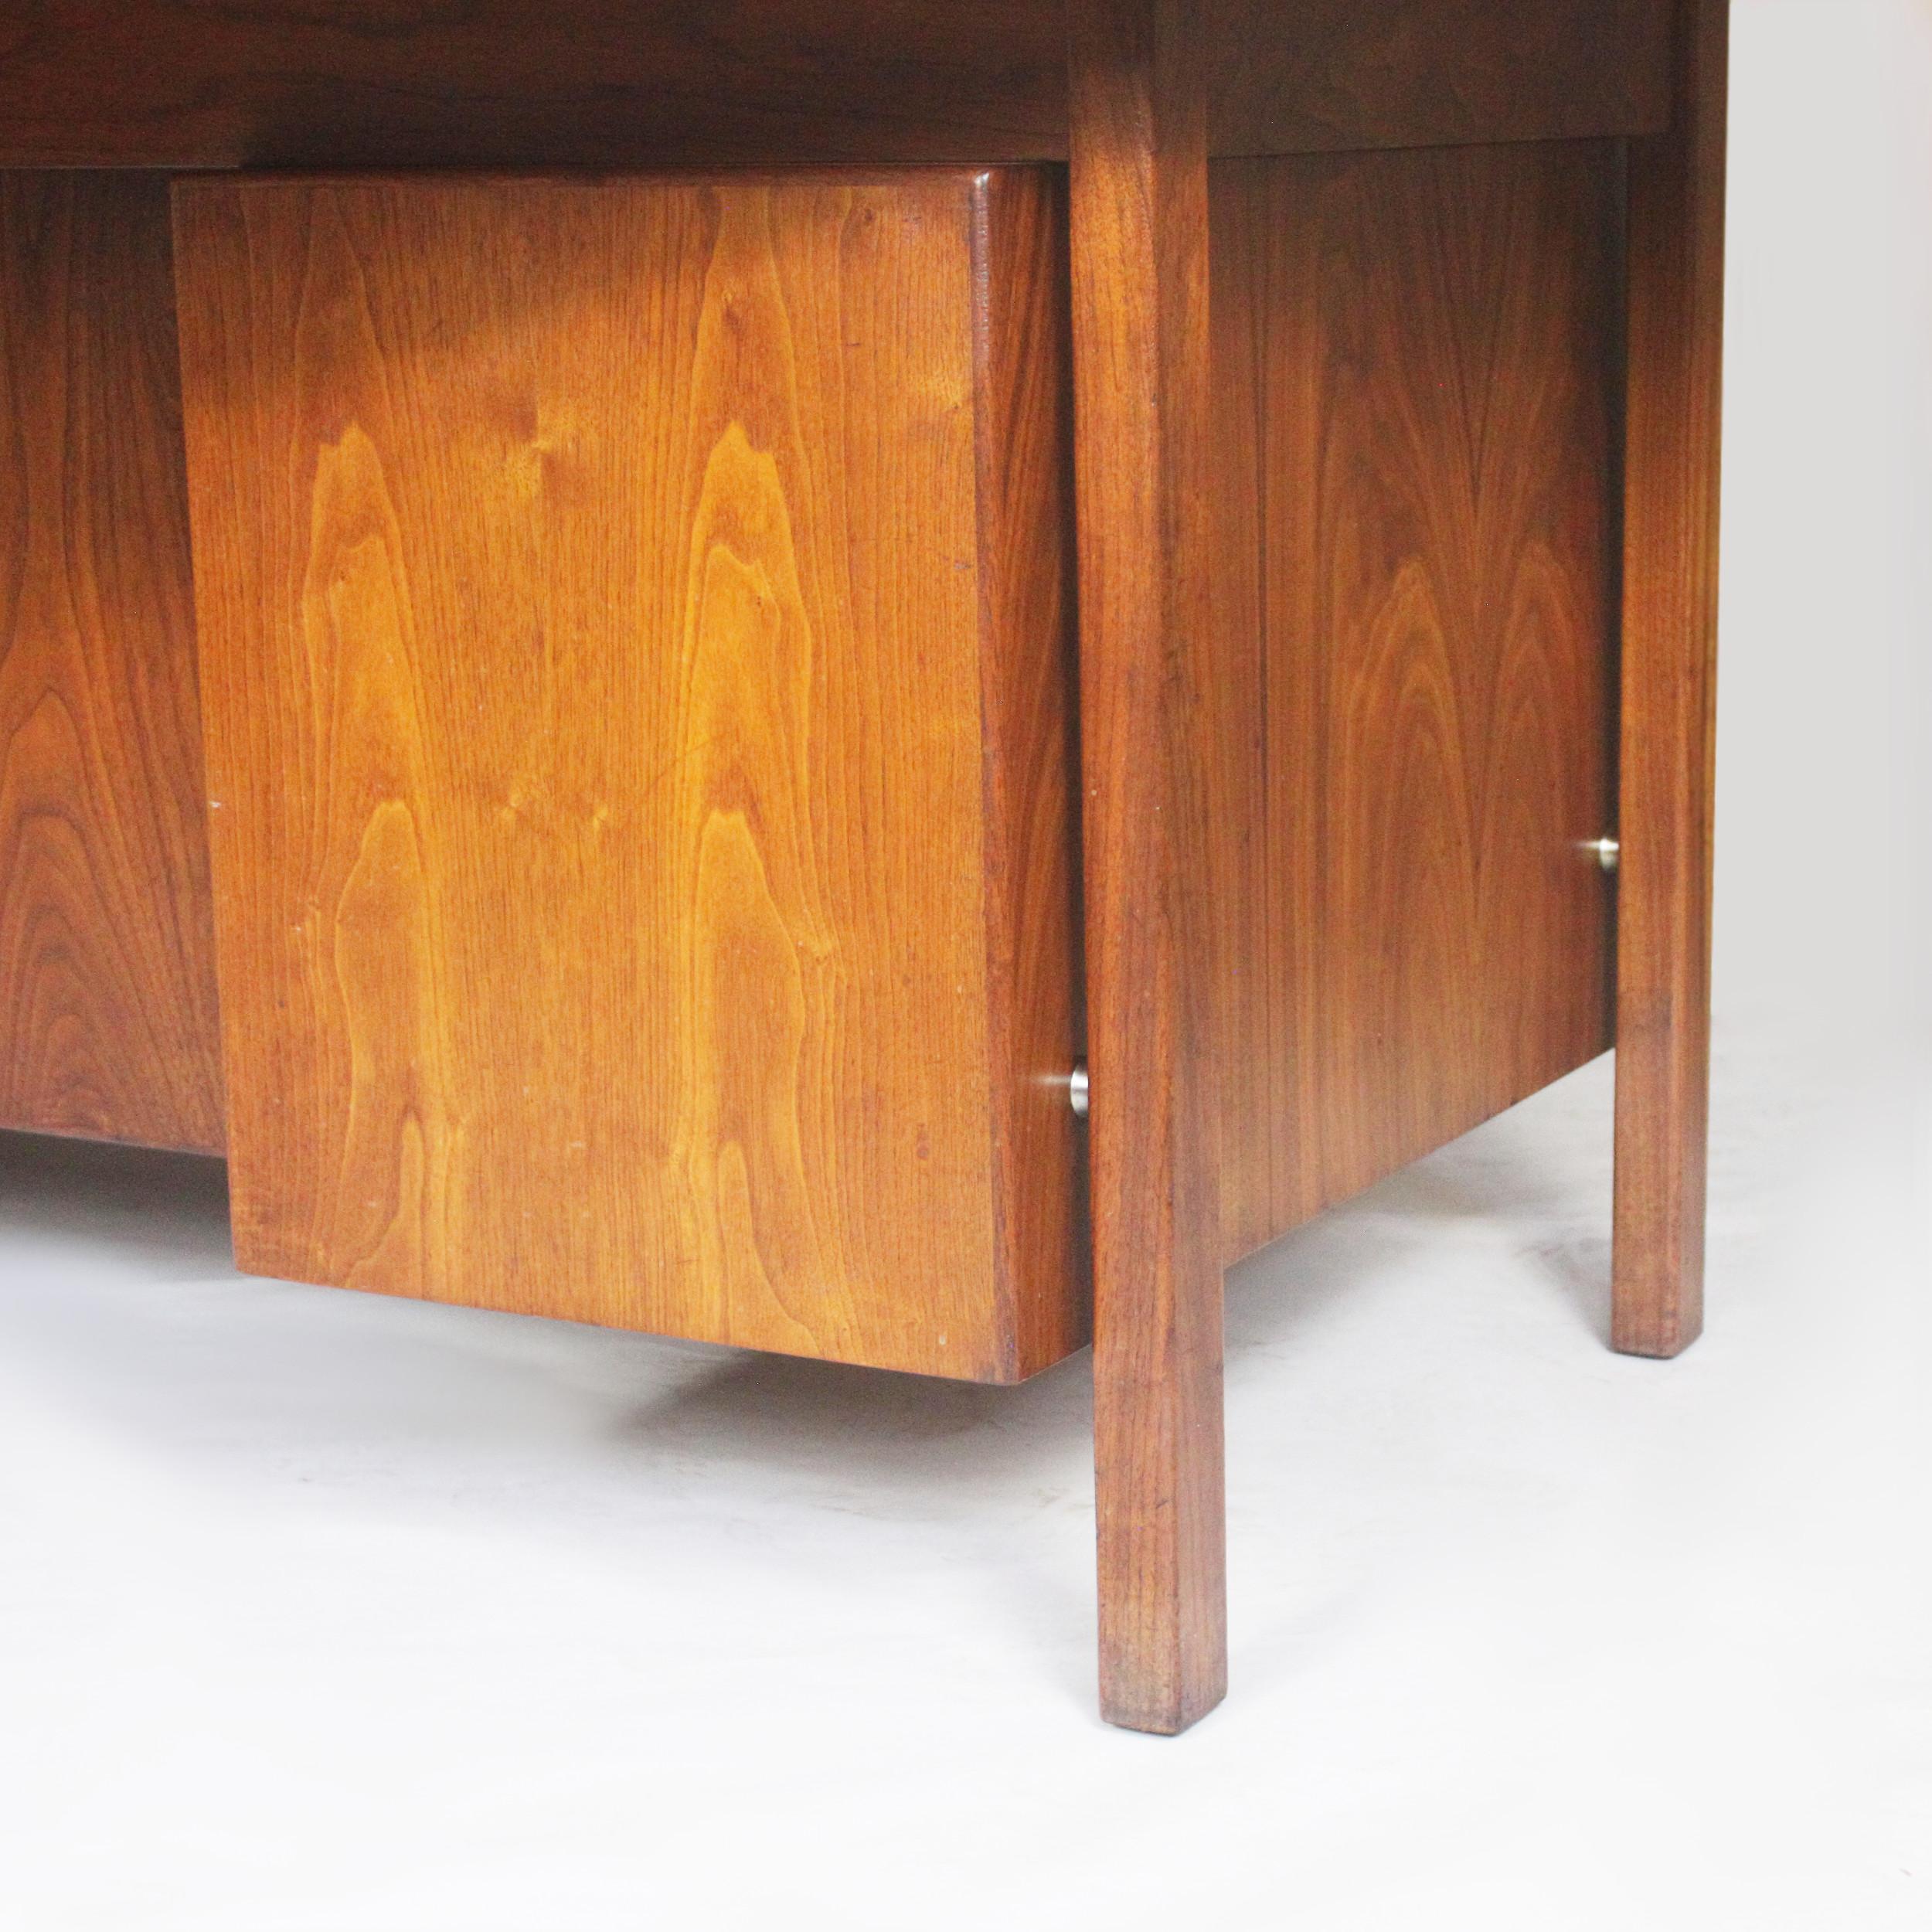 Spectacular Mid-Century Modern Walnut Demilune Executive Desk by Jens Risom For Sale 2